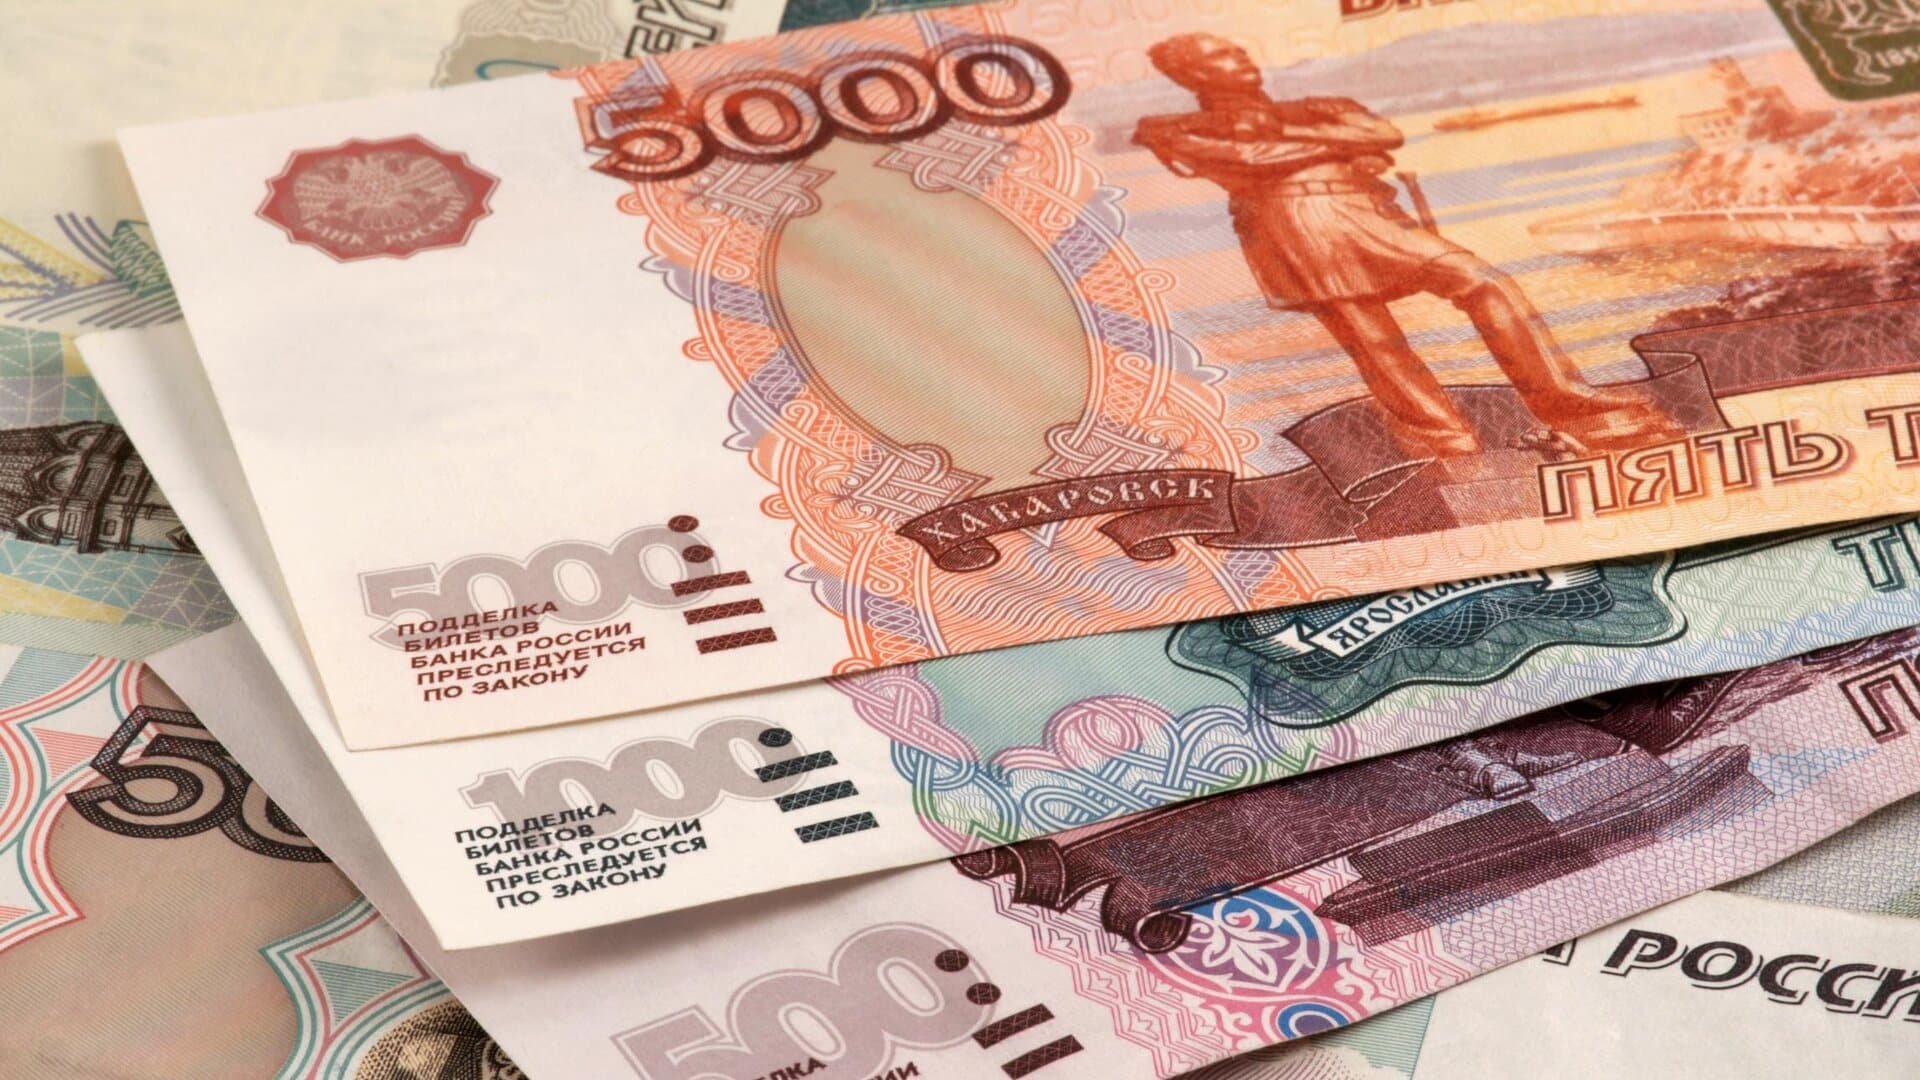 Russian Ruble dives nearly 30% against dollar amid sanctions over Ukraine invasion